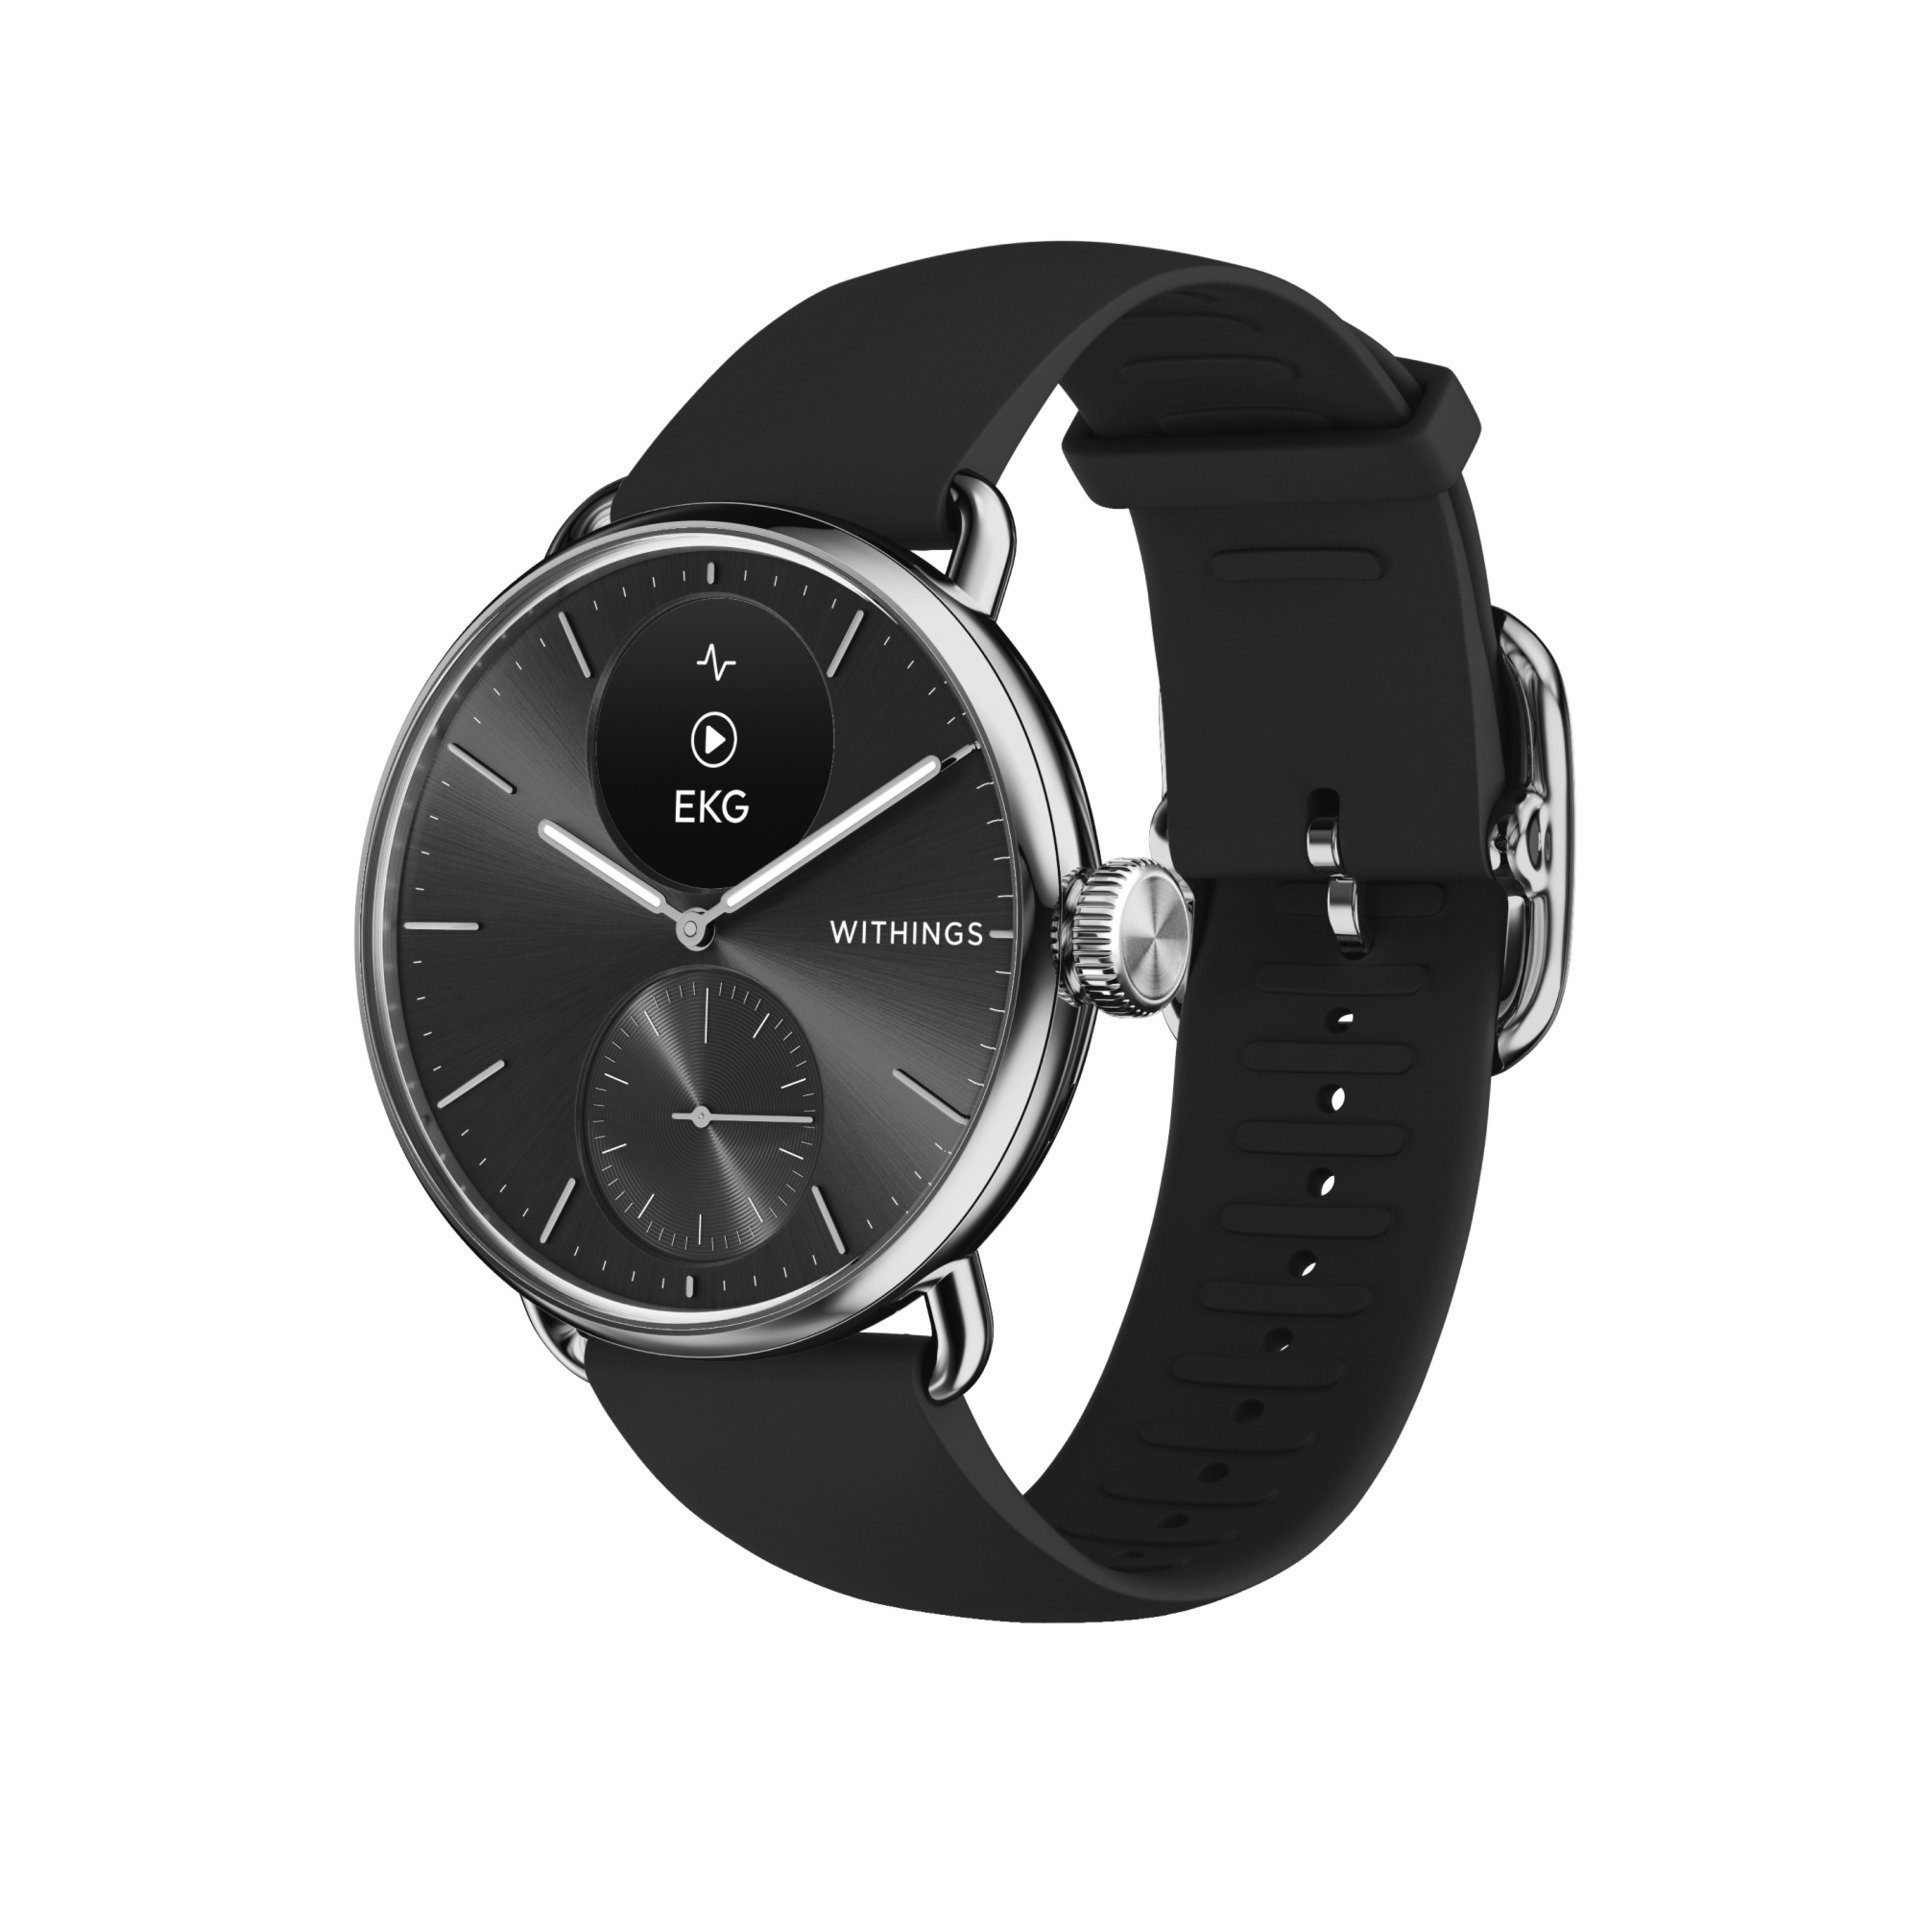 mm) Zoll) (1,6 2 Withings Smartwatch cm/0,63 (38 ScanWatch